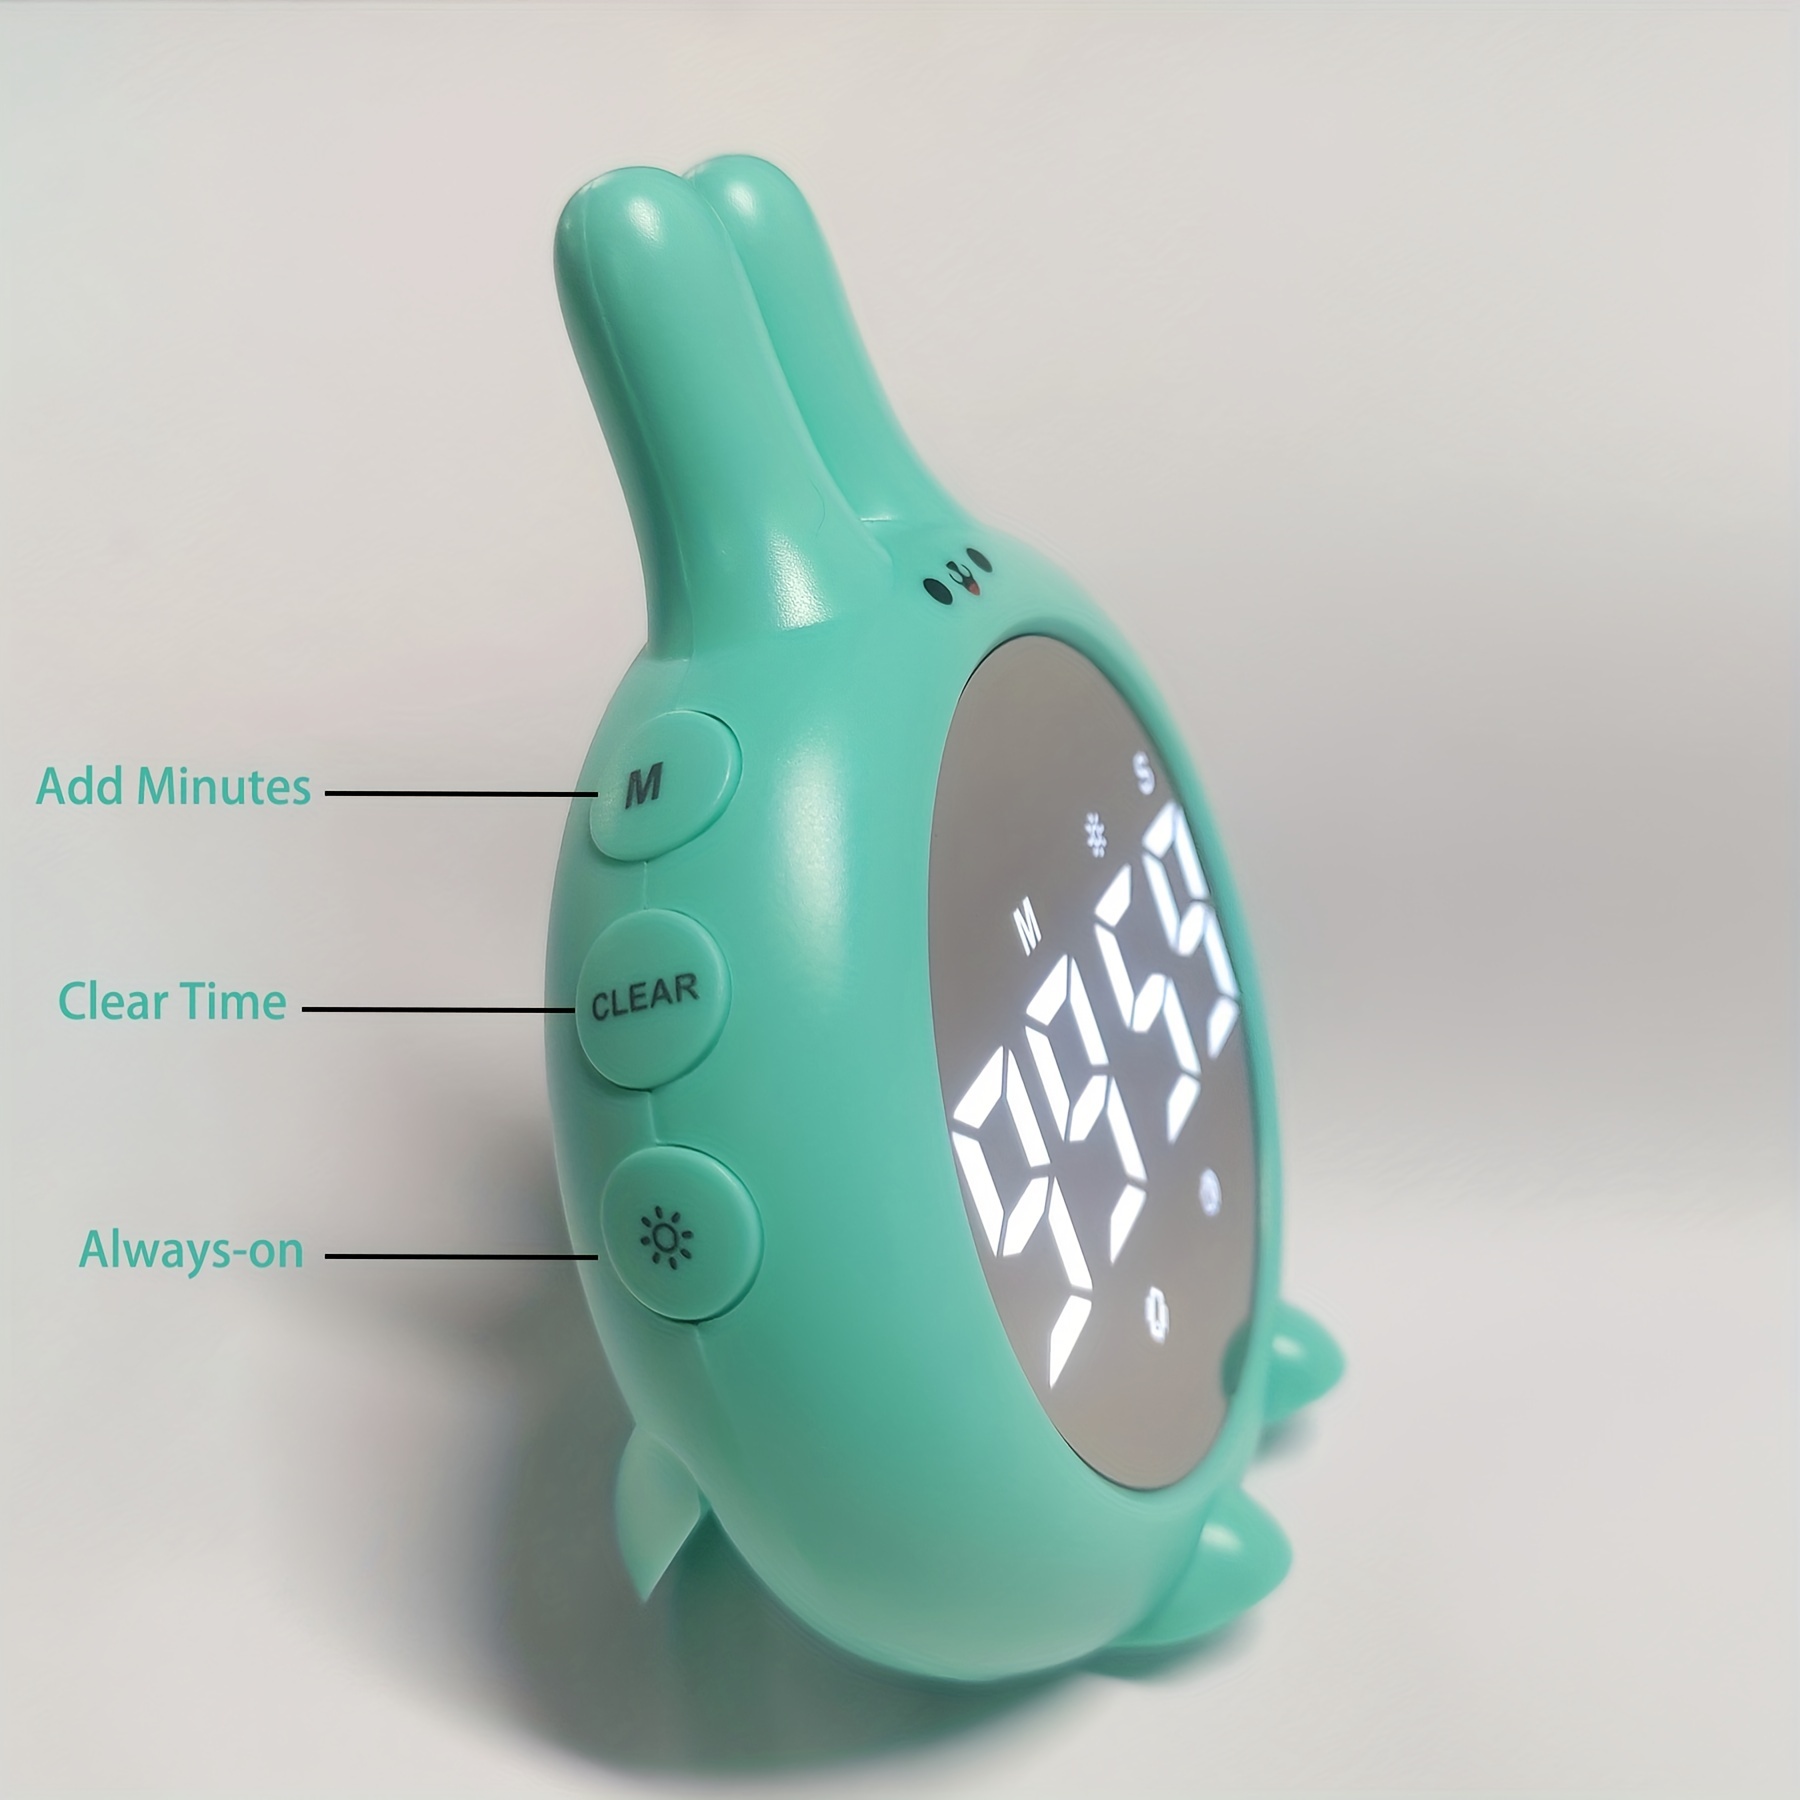 Timer for Kids, Classroom Timer for Young Students